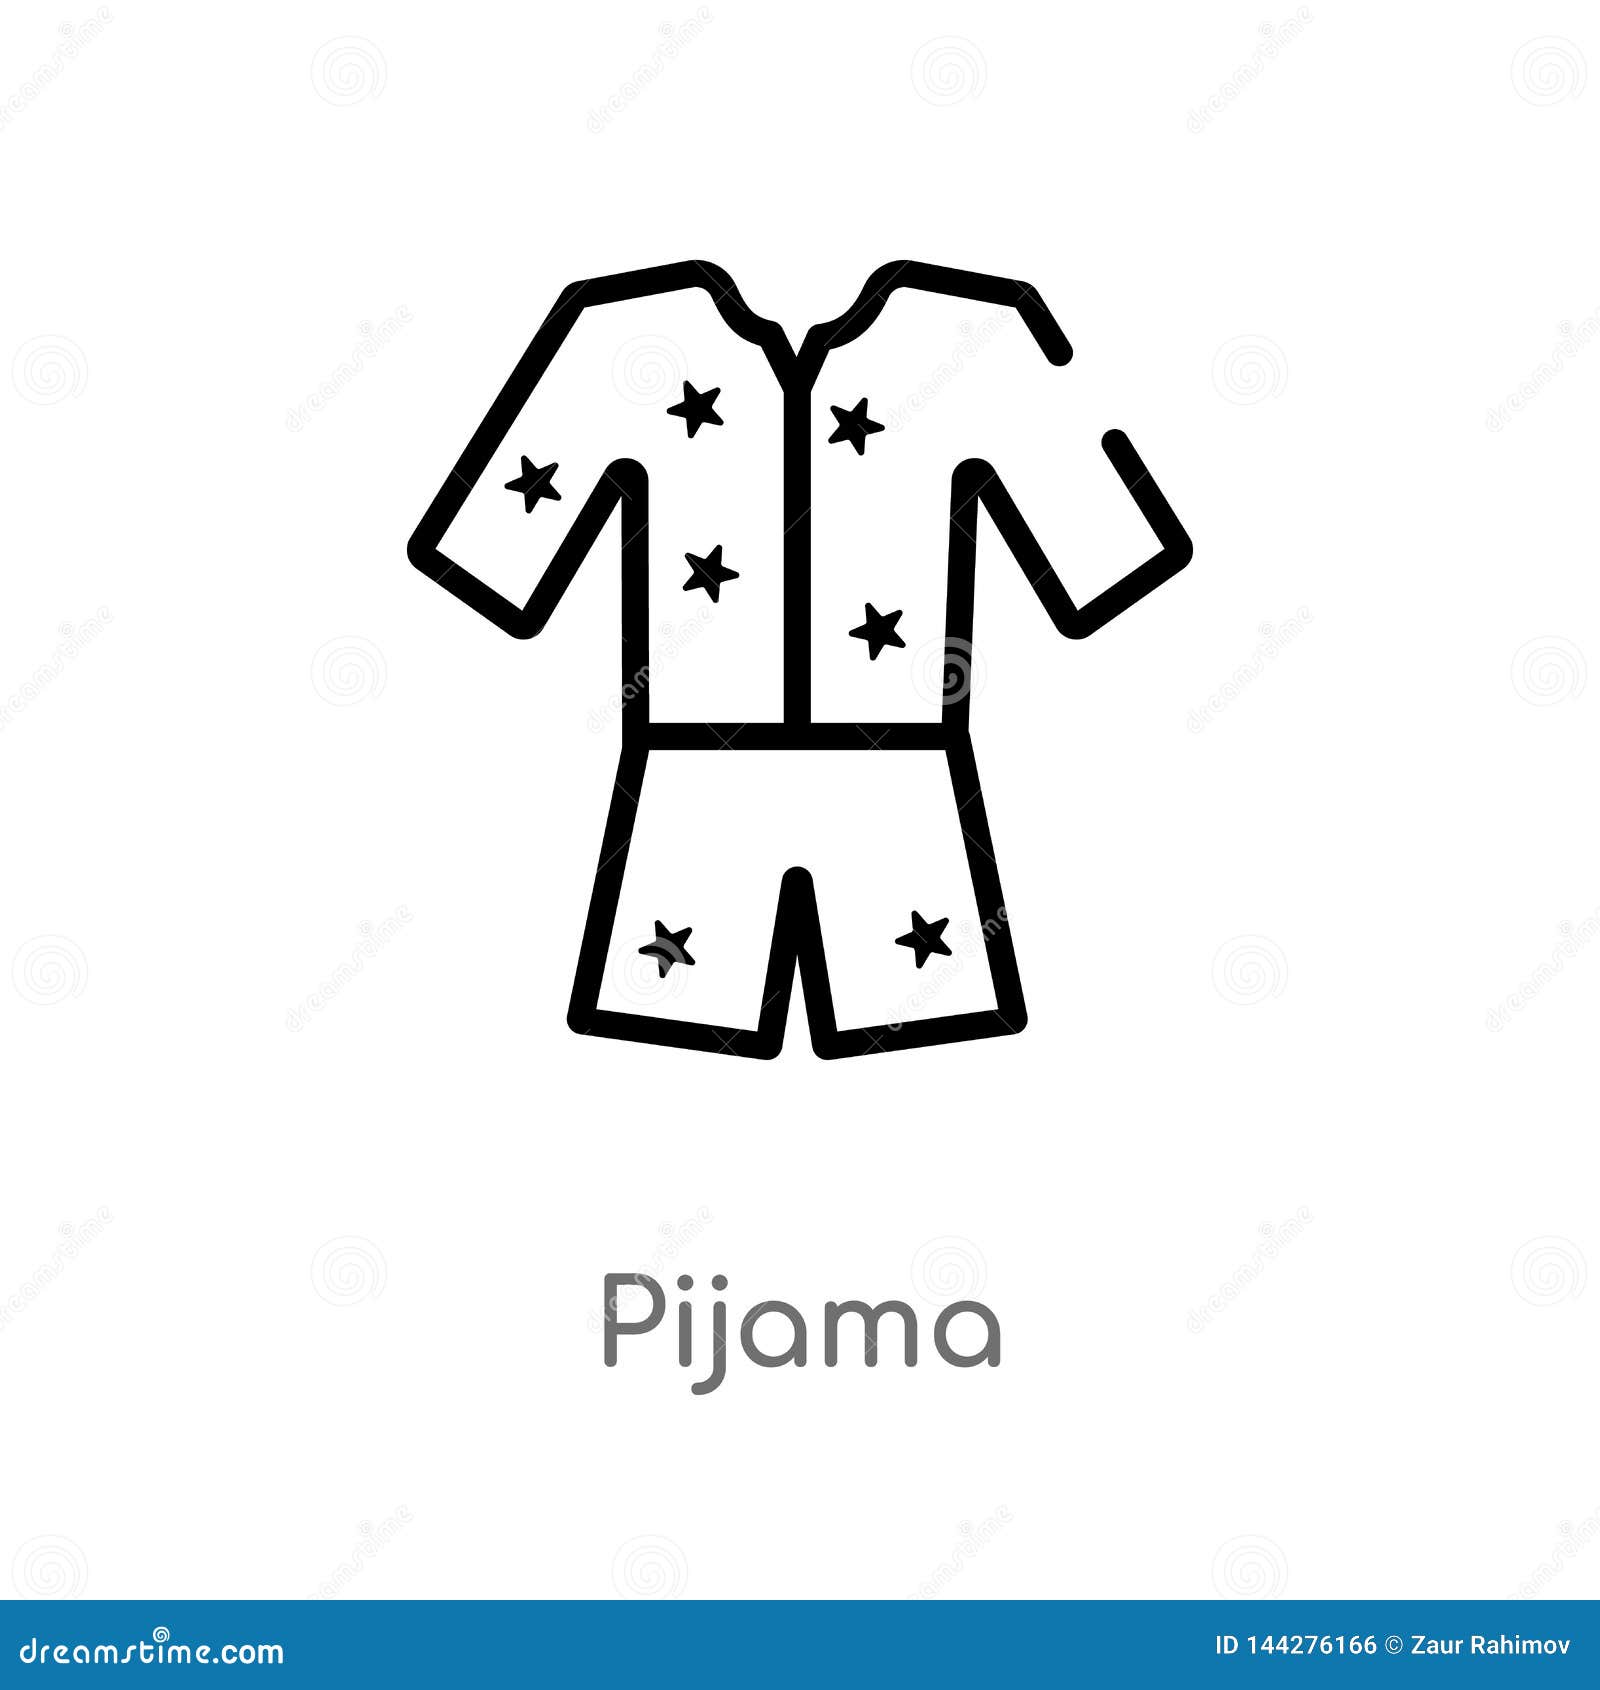 outline pijama  icon.  black simple line   from clothes concept. editable  stroke pijama